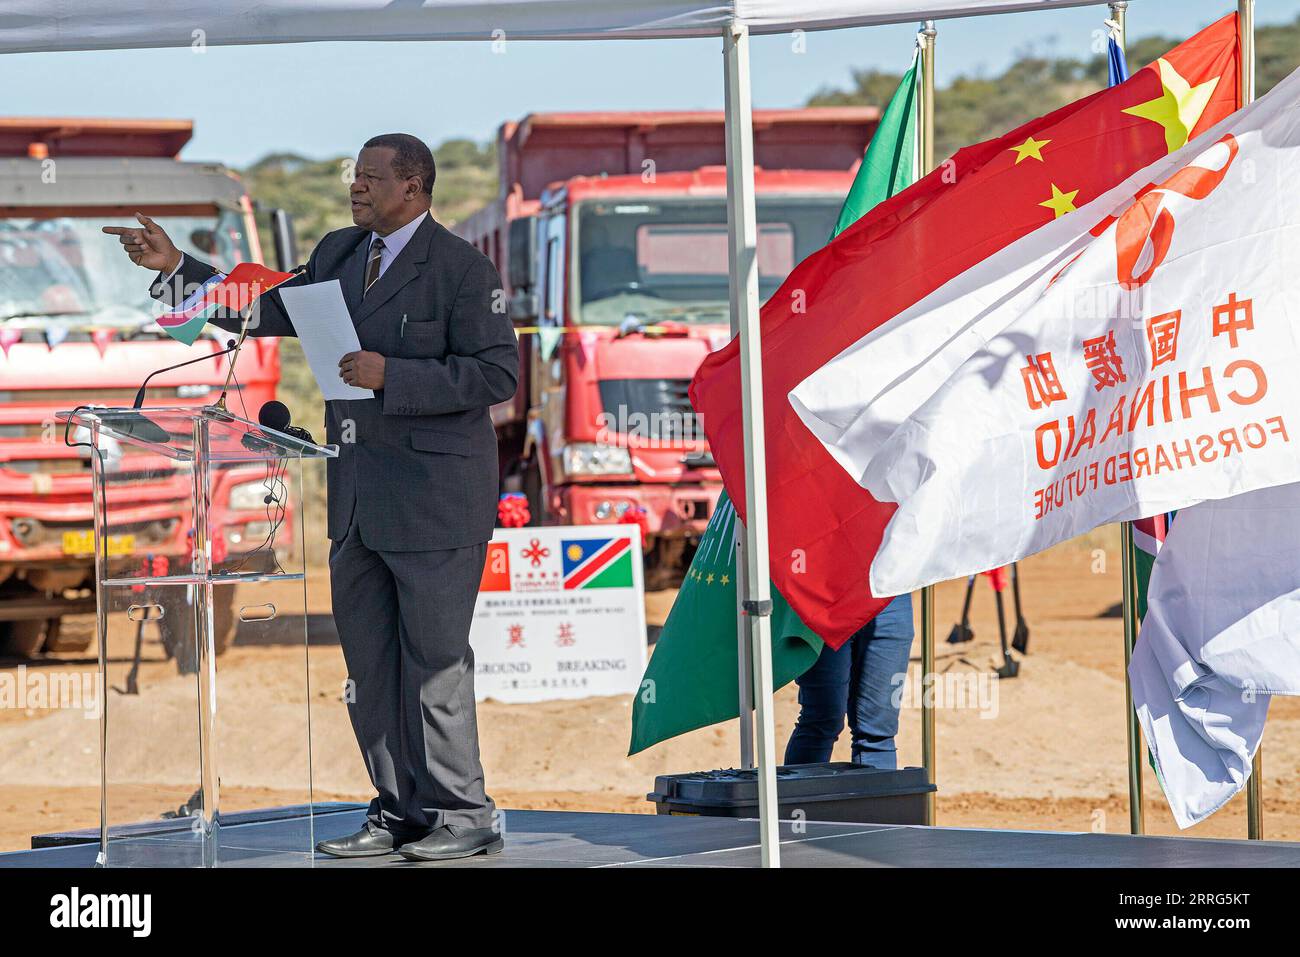 220509 -- WINDHOEK, May 9, 2022 -- Namibian Minister of Works and Transport John Mutorwa speaks during an official groundbreaking ceremony of a China-aided project in Windhoek, Namibia, on May 9, 2022. China-aided projects continue to support infrastructure development in Namibia with the latest project being the upgrading of Phase 2B of the Windhoek to Hosea Kutako International Airport road. Photo by /Xinhua NAMIBIA-WINDHOEK-CHINA-AIDED INFRASTRUCTURE PROJECT MusaxCxKaseke PUBLICATIONxNOTxINxCHN Stock Photo